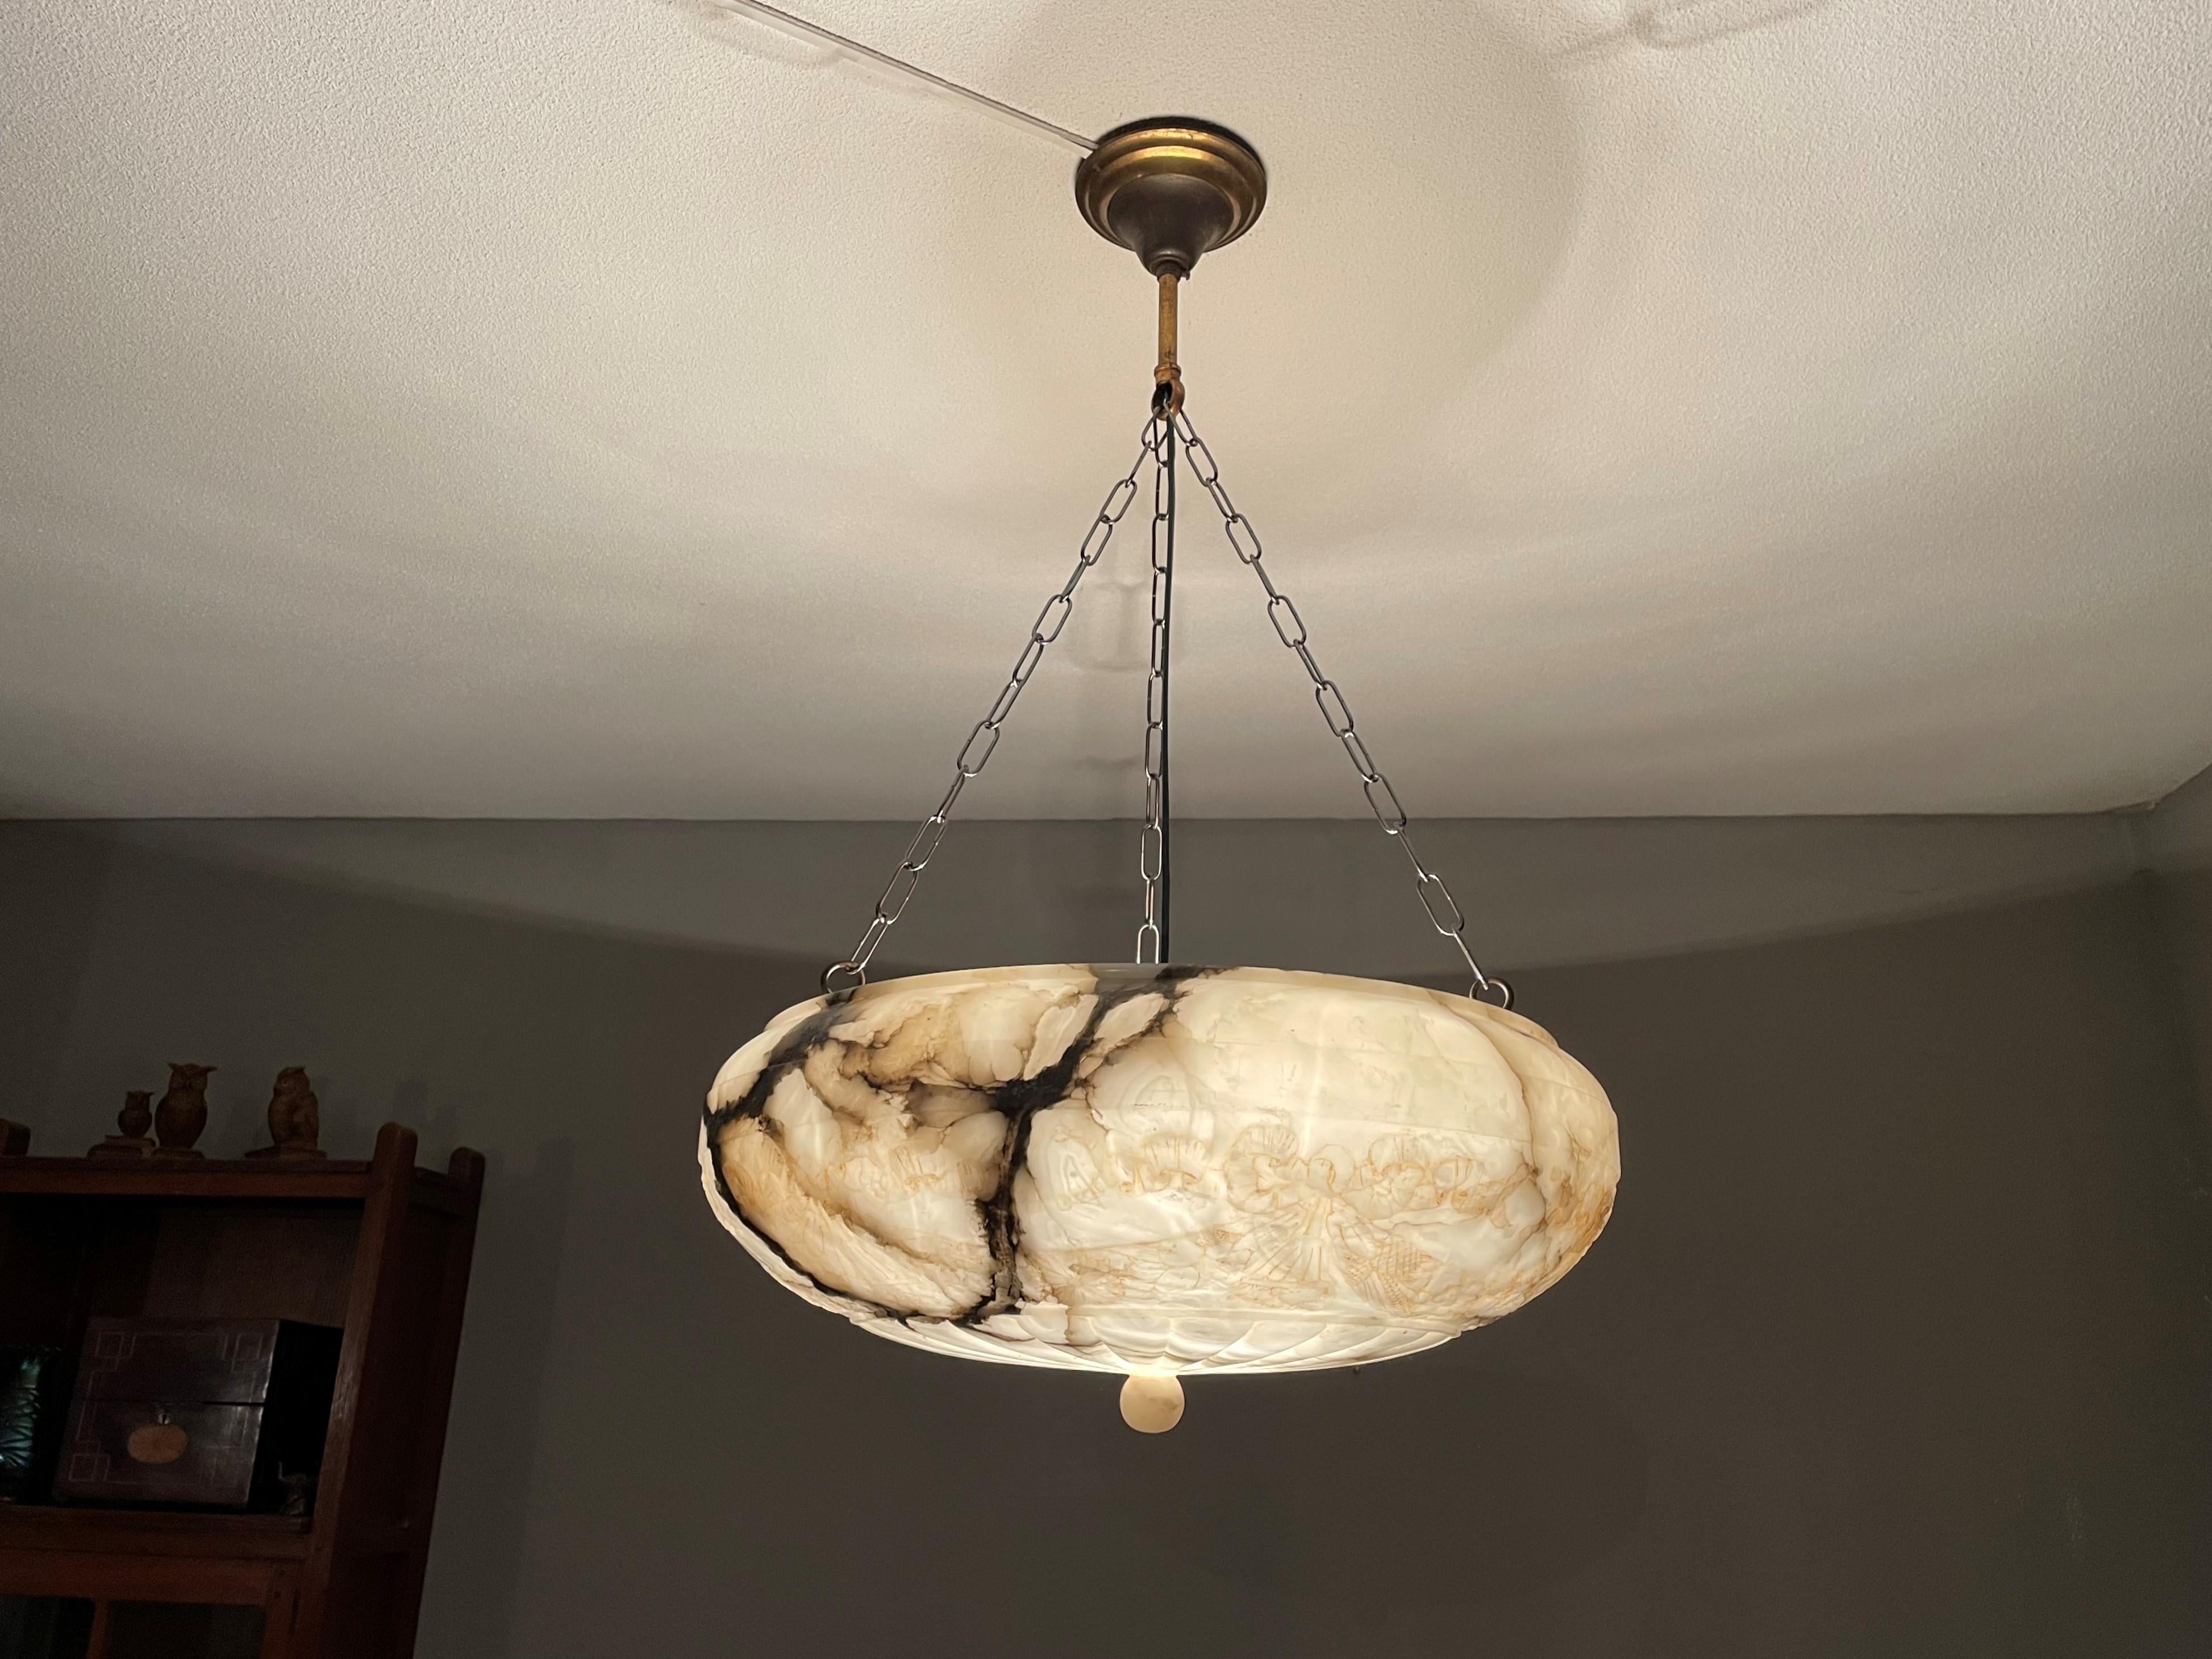 Top class light fixture with a stunning alabaster shade of 20 inches in diameter.

Thanks to its unique design, its large size and its excellent condition this alabaster chandelier will light up both your days and evenings. Apart from the bronzed